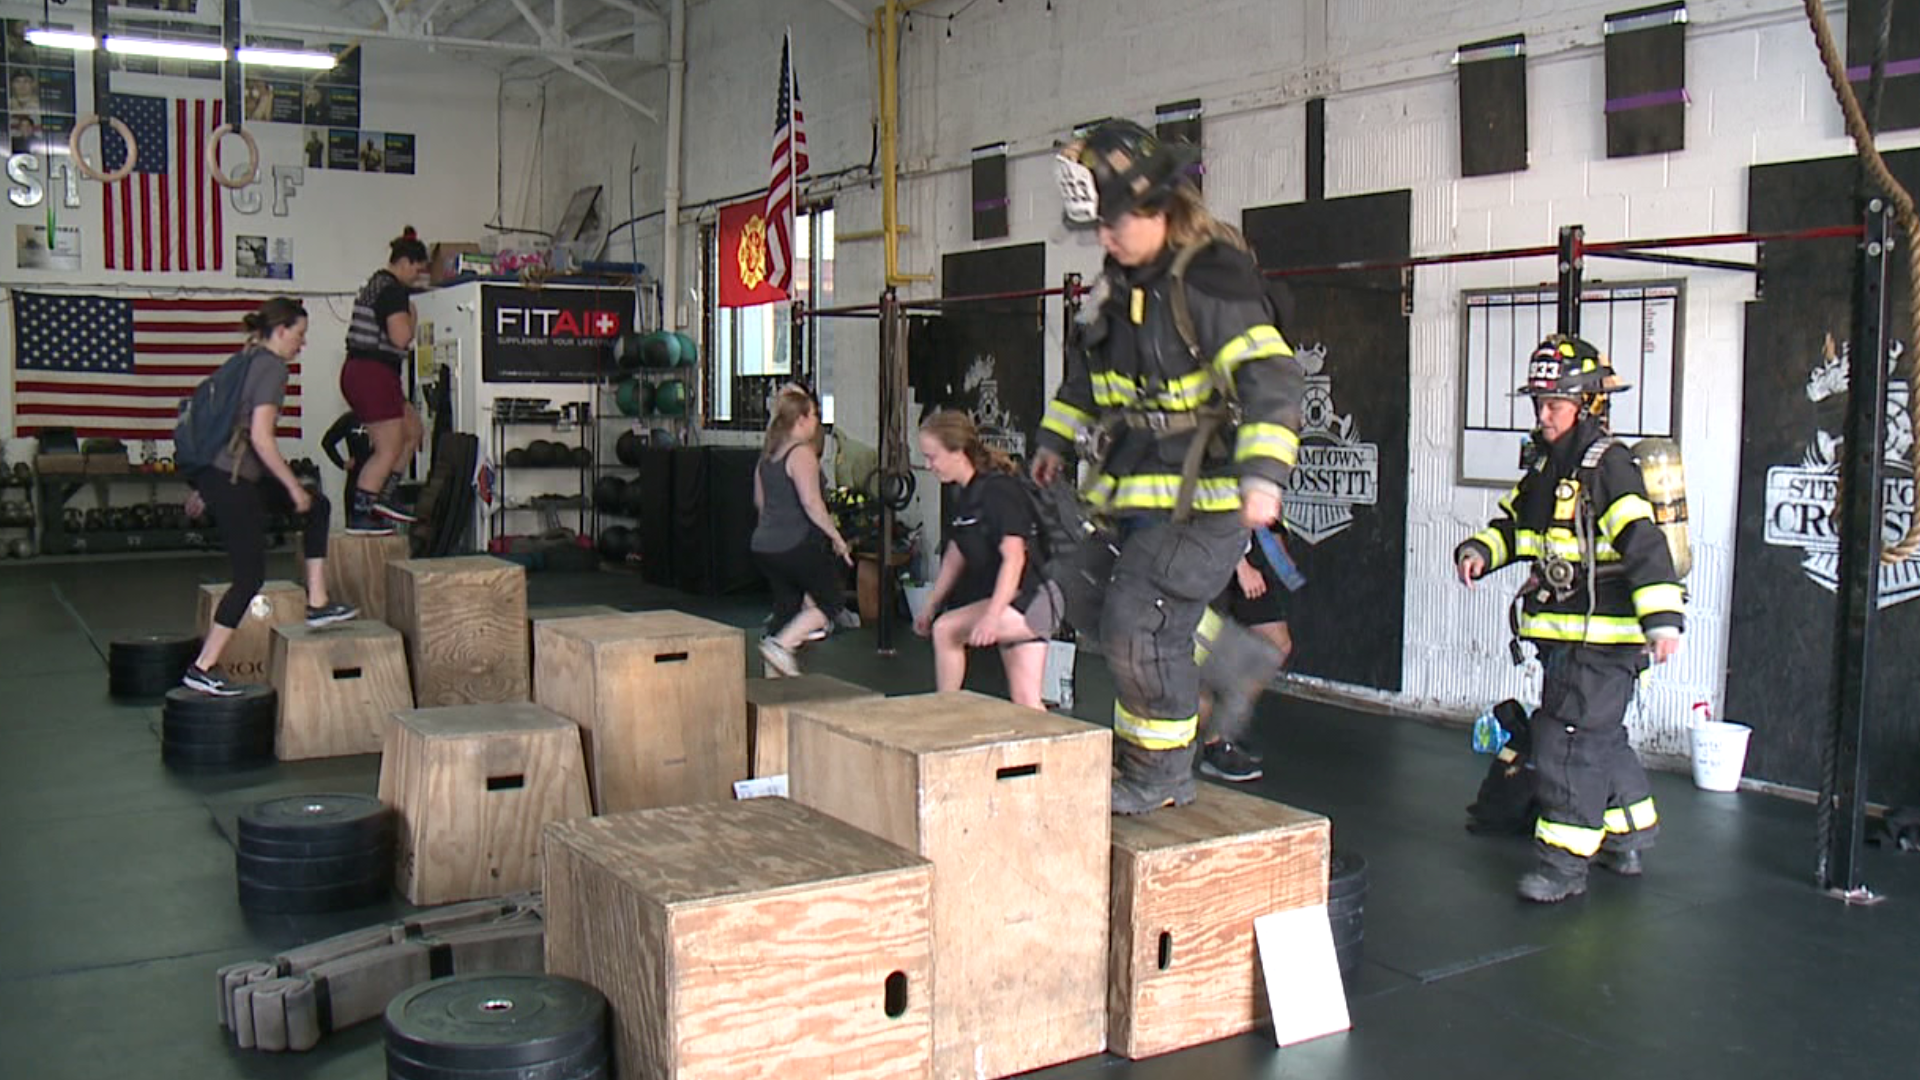 At Steamtown Crossfit, people climbed 2,071 stairs to honor the steps taken by the 9/11 heroes.